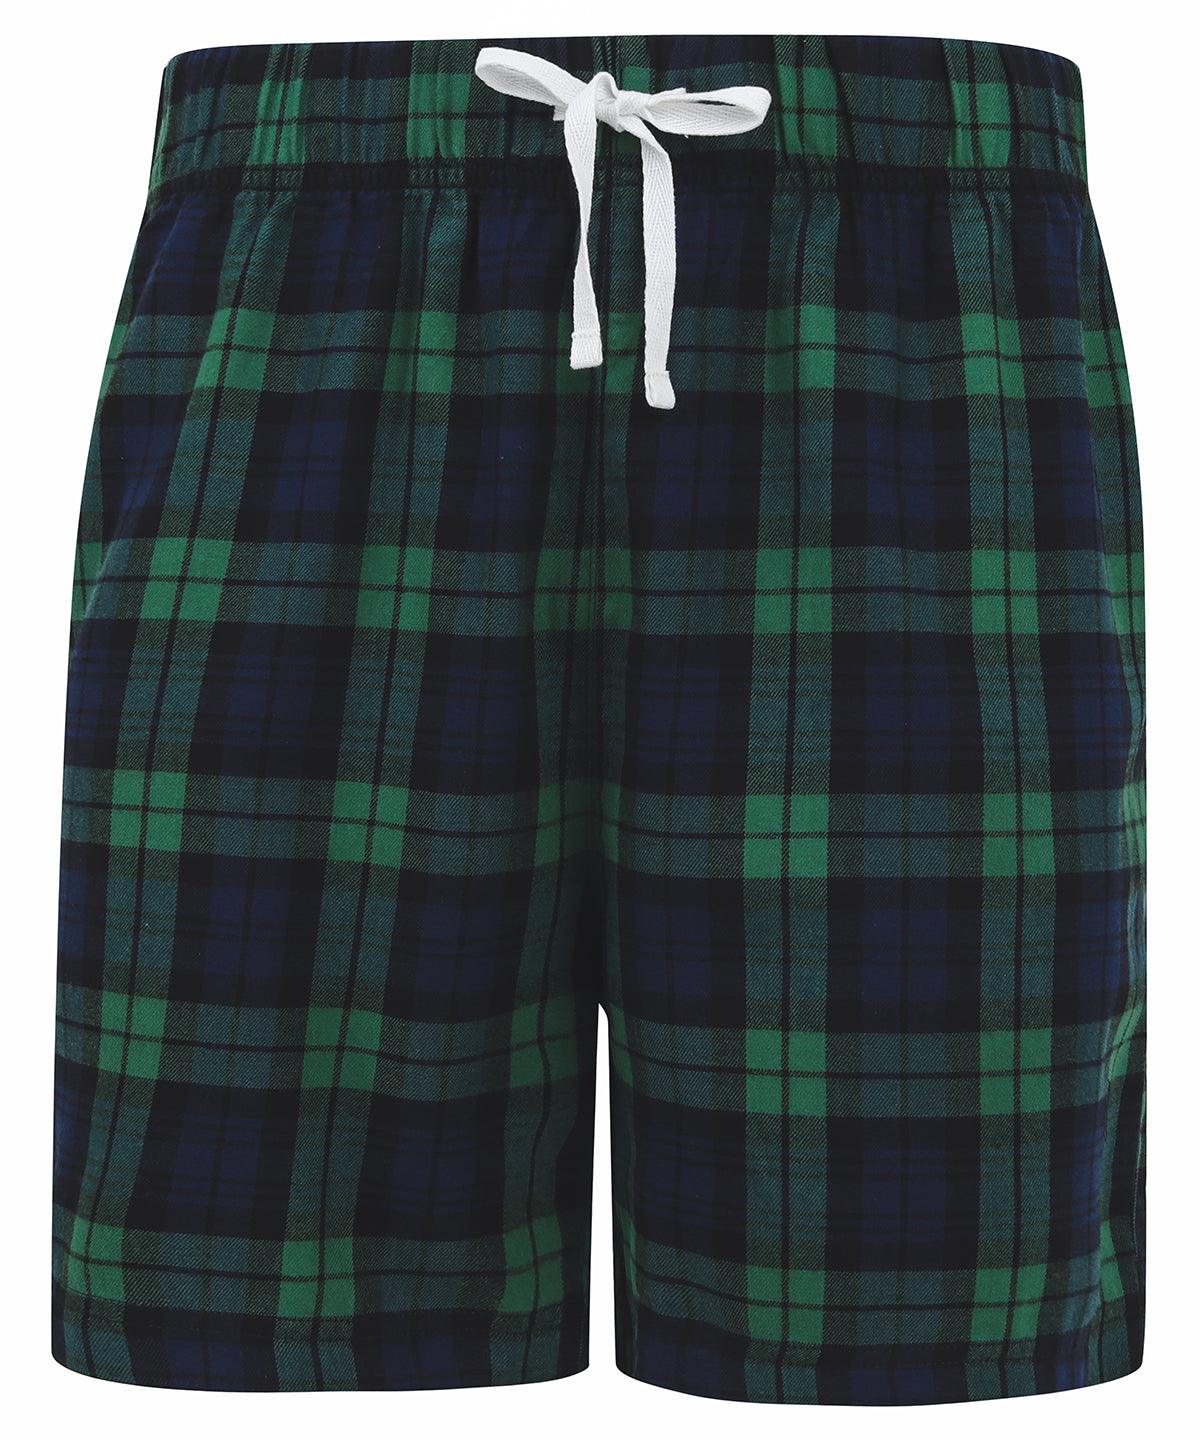 Navy/Green Check - Tartan lounge shorts Shorts SF Directory, Lounge & Underwear, Lounge Sets, Rebrandable, Trousers & Shorts Schoolwear Centres